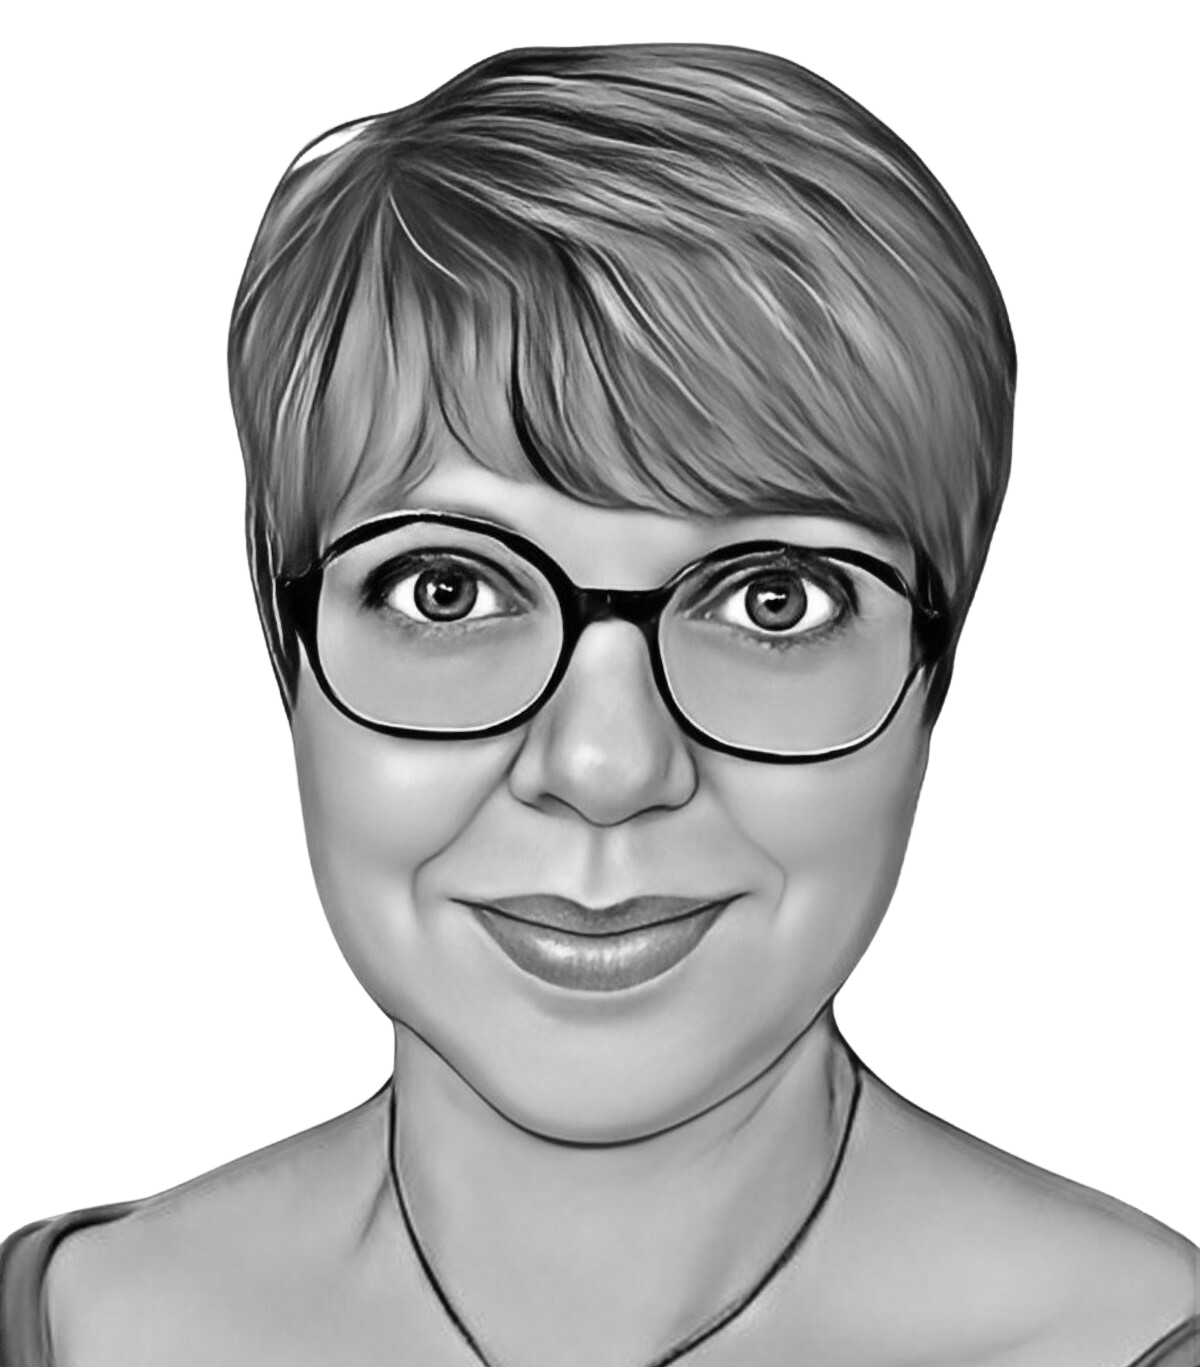 Cartoon of content, smiling woman with short hair and glasses